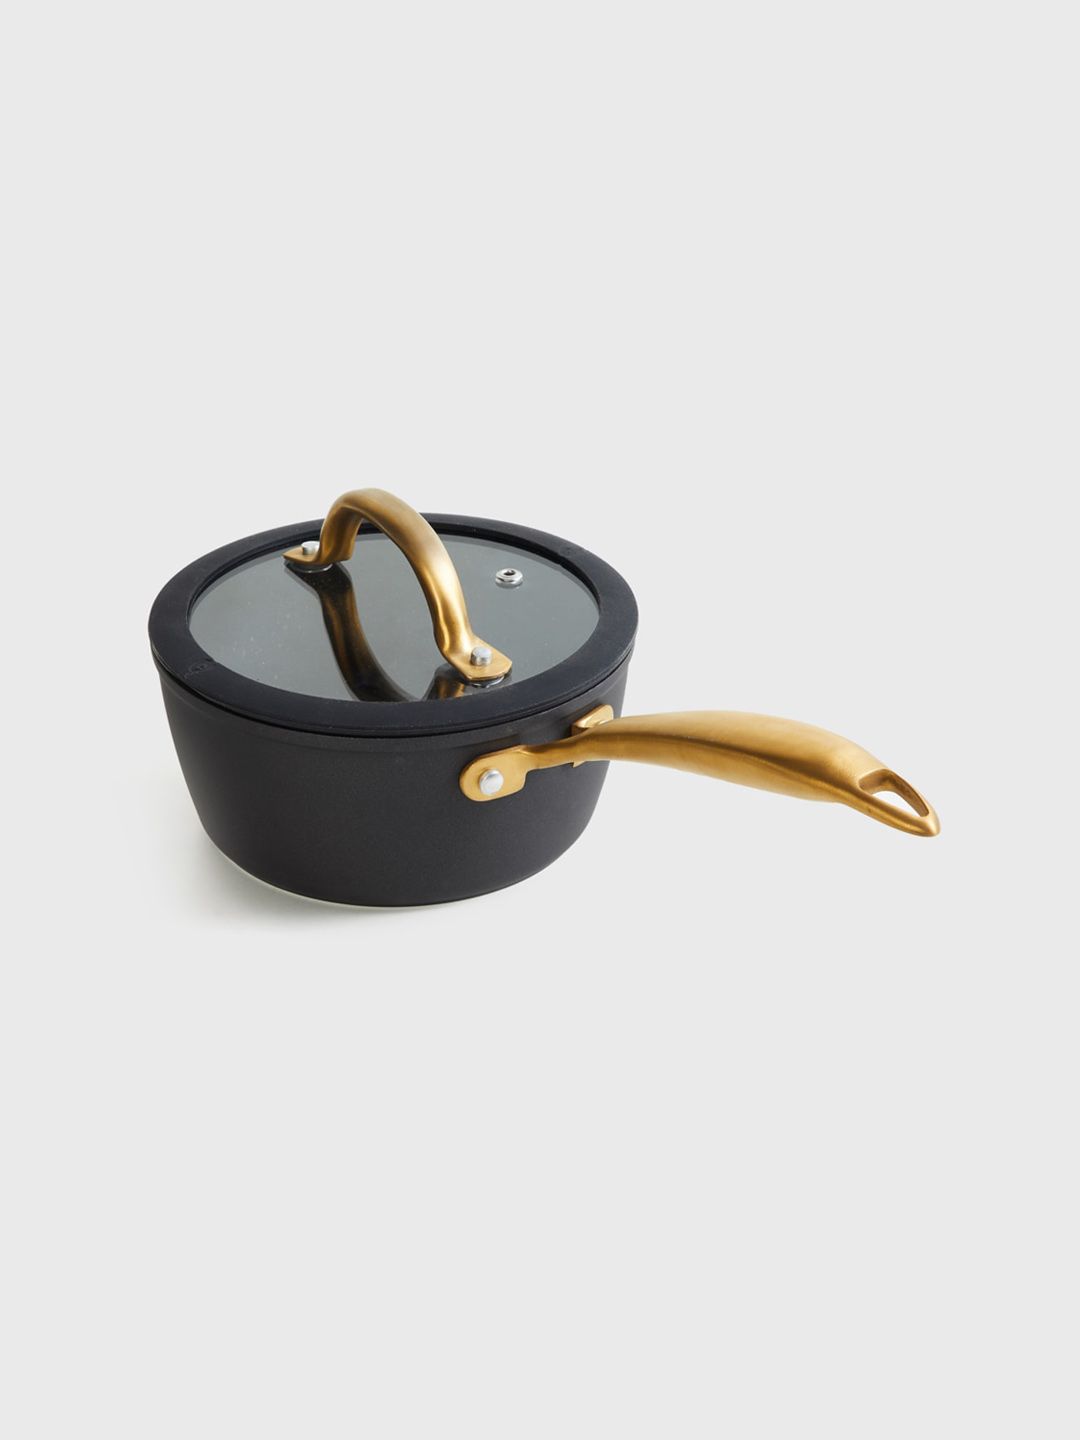 Home Centre Black & Gold-Toned Solid Aluminium Saucepan With Lid Price in India